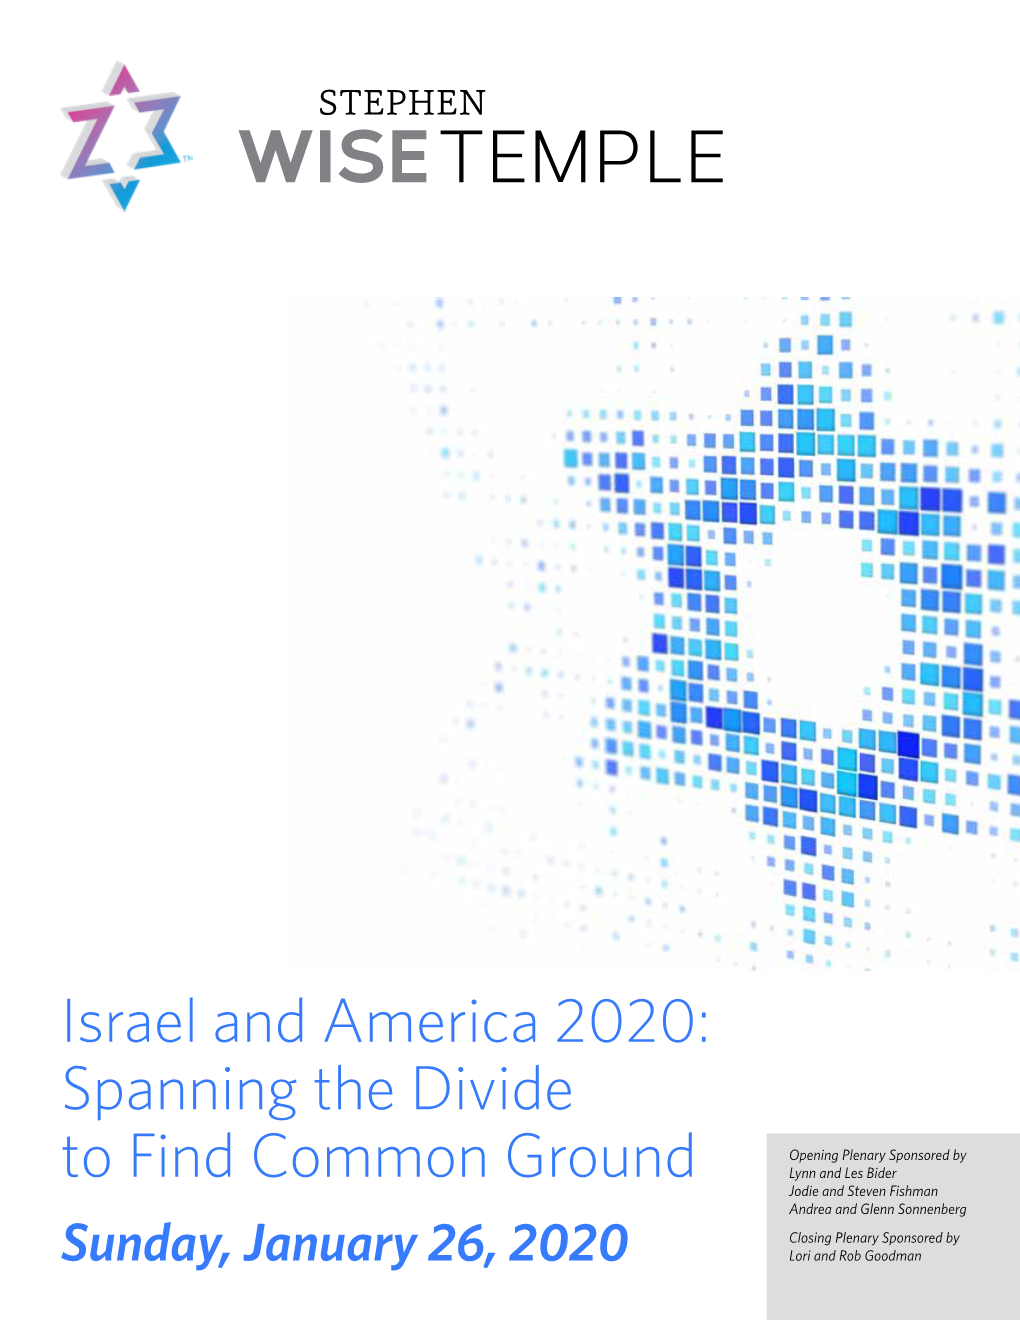 Israel and America 2020: Spanning the Divide